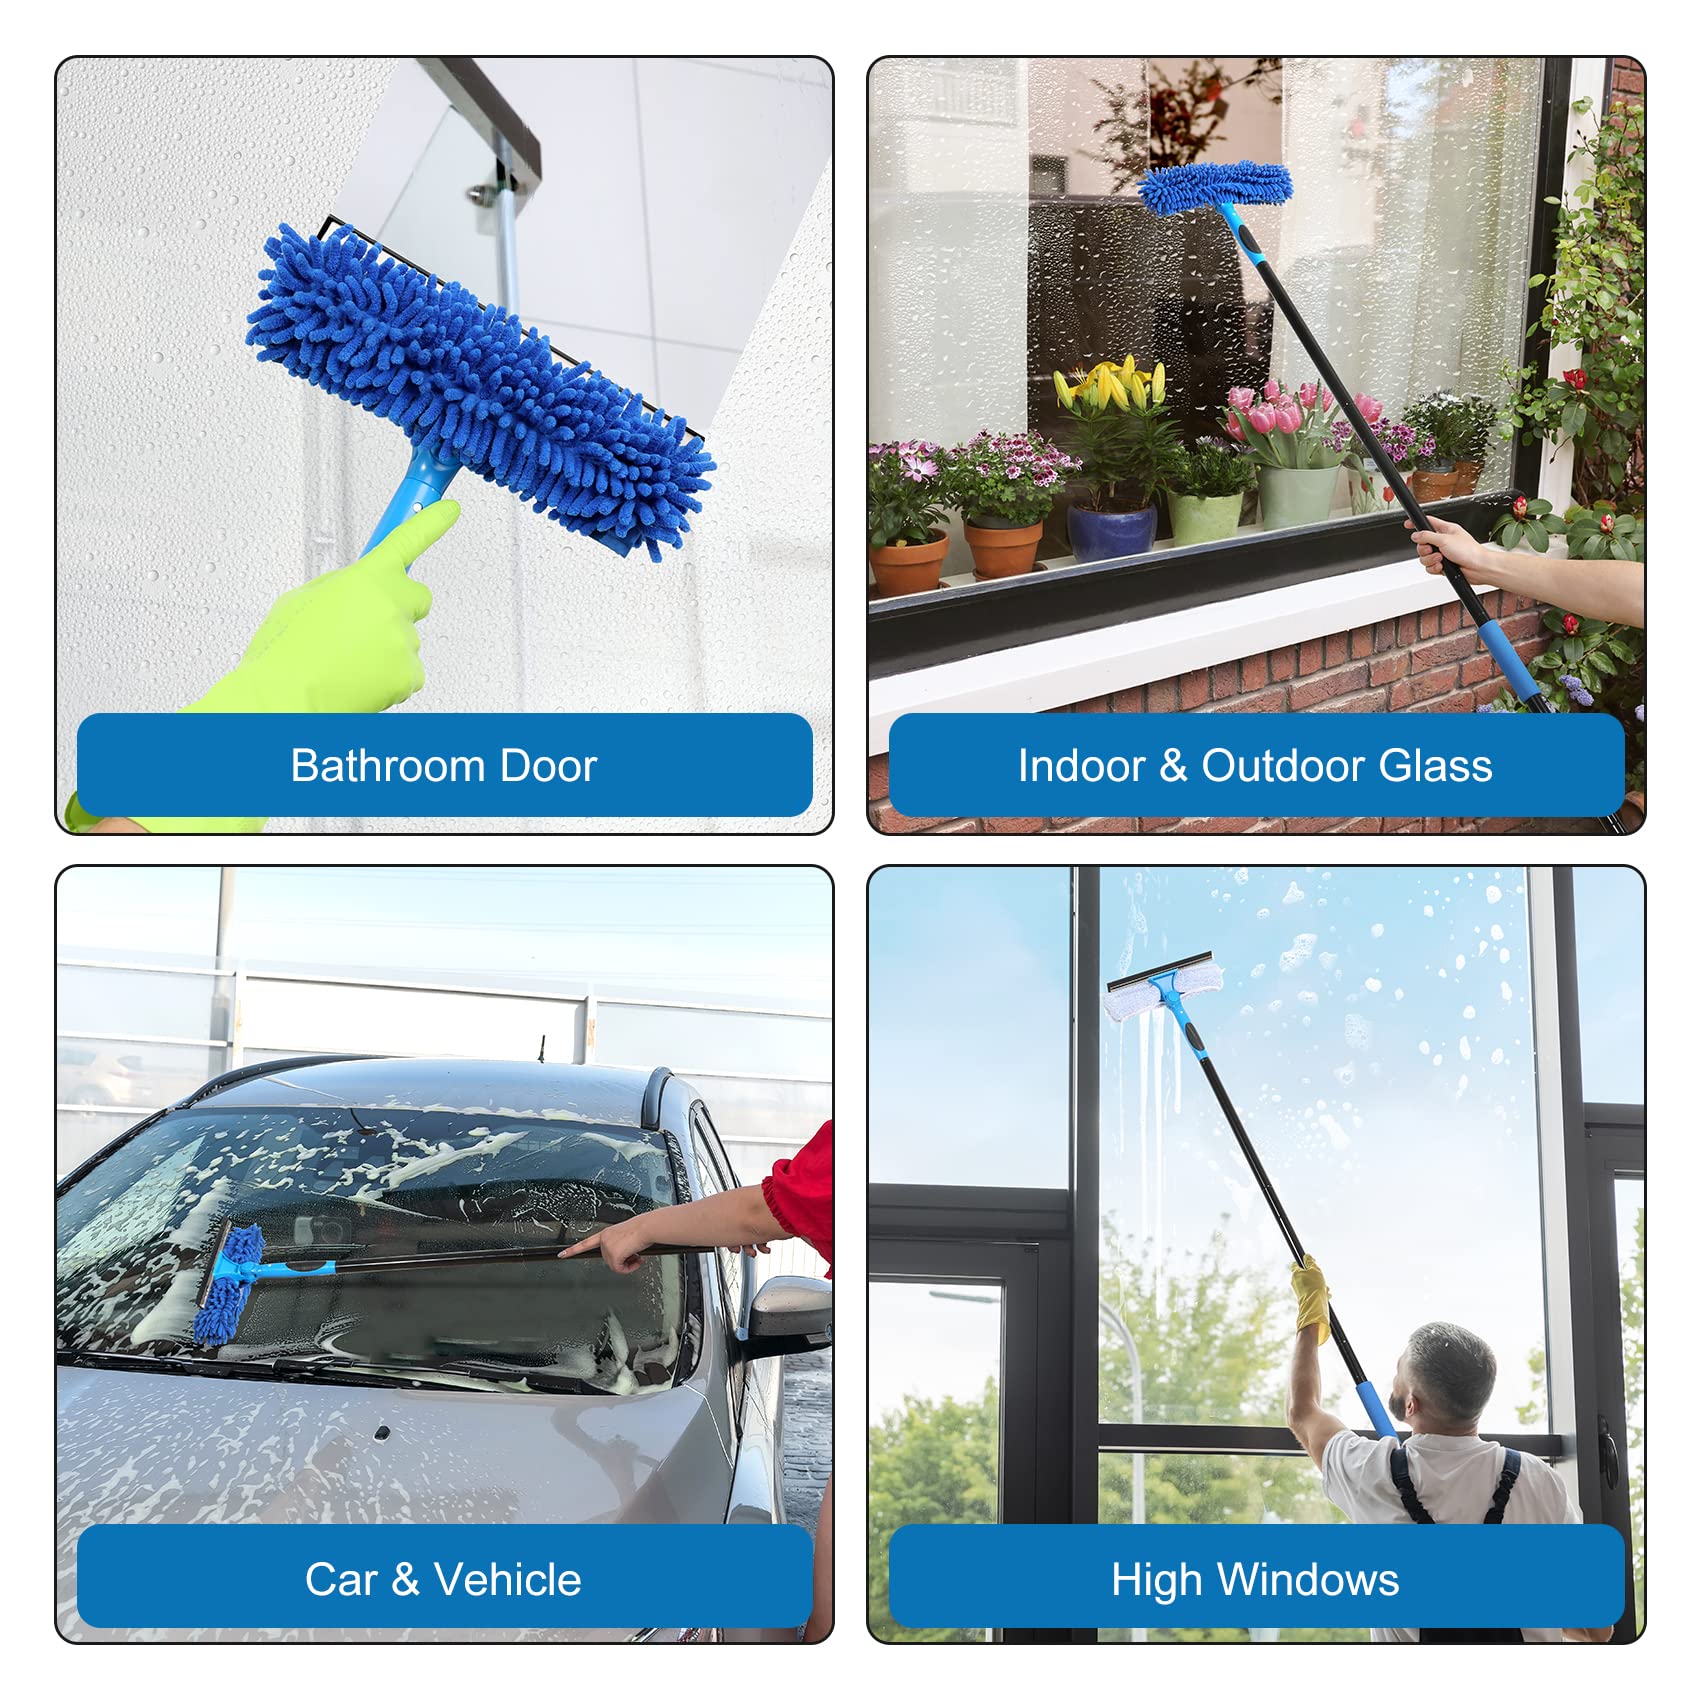 VITEVER Professional Window Squeegee Cleaner Tool with Extension Pole | 2-in-1 Window Squeegee with Scrubber Cleaning Kit